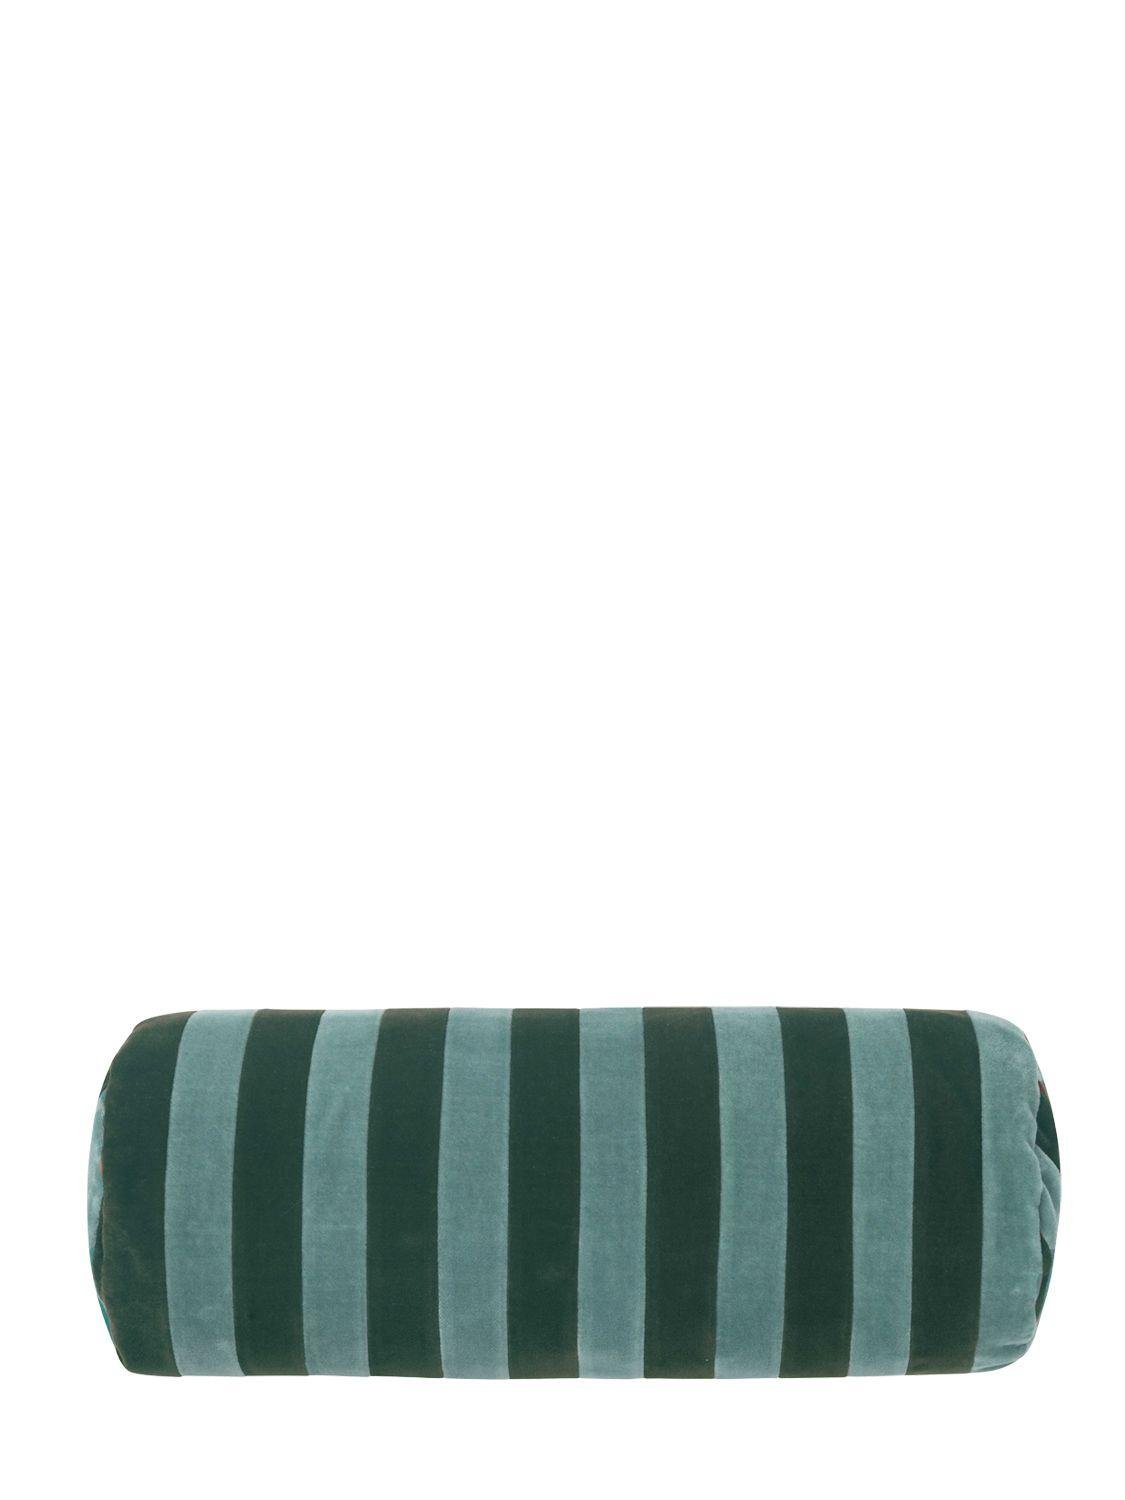 Striped Bolster by CHRISTINA LUNDSTEEN